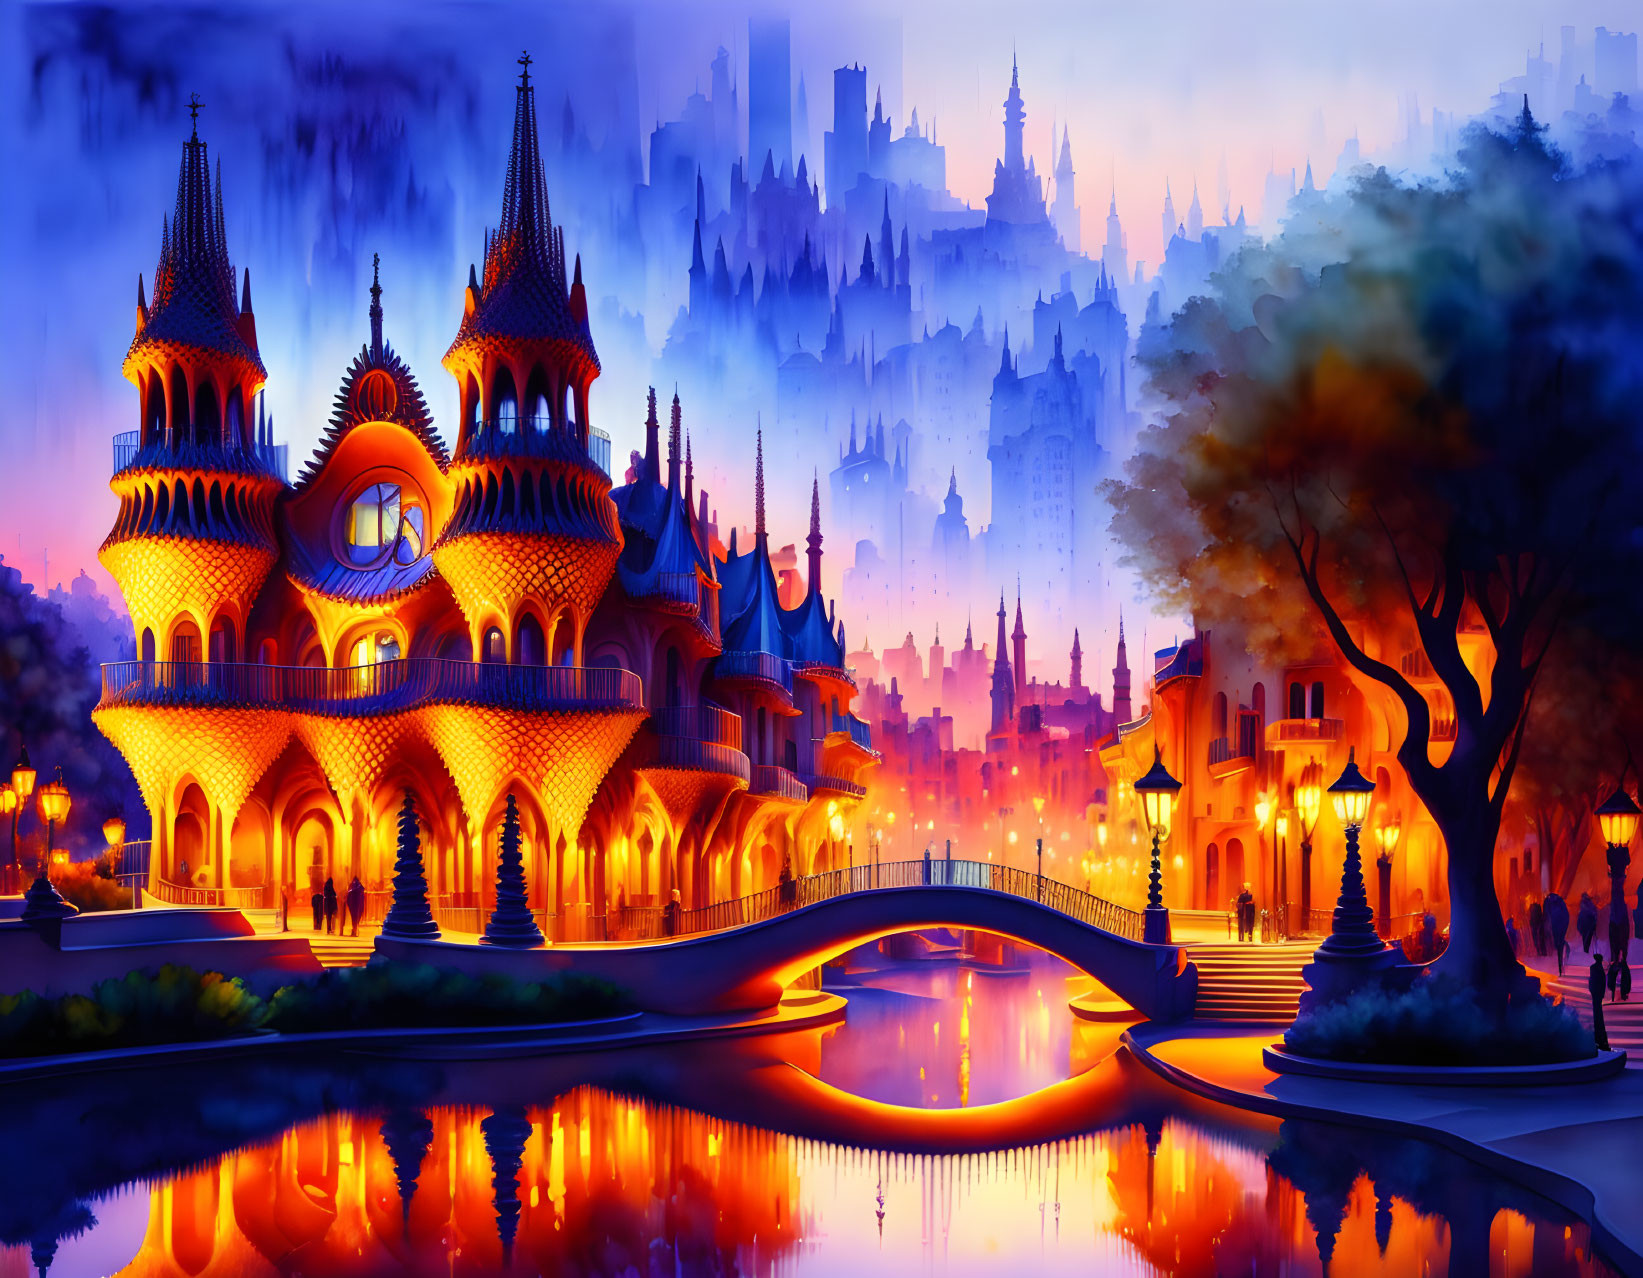 Fantasy castle with glowing orange lights and silhouetted spires at twilight